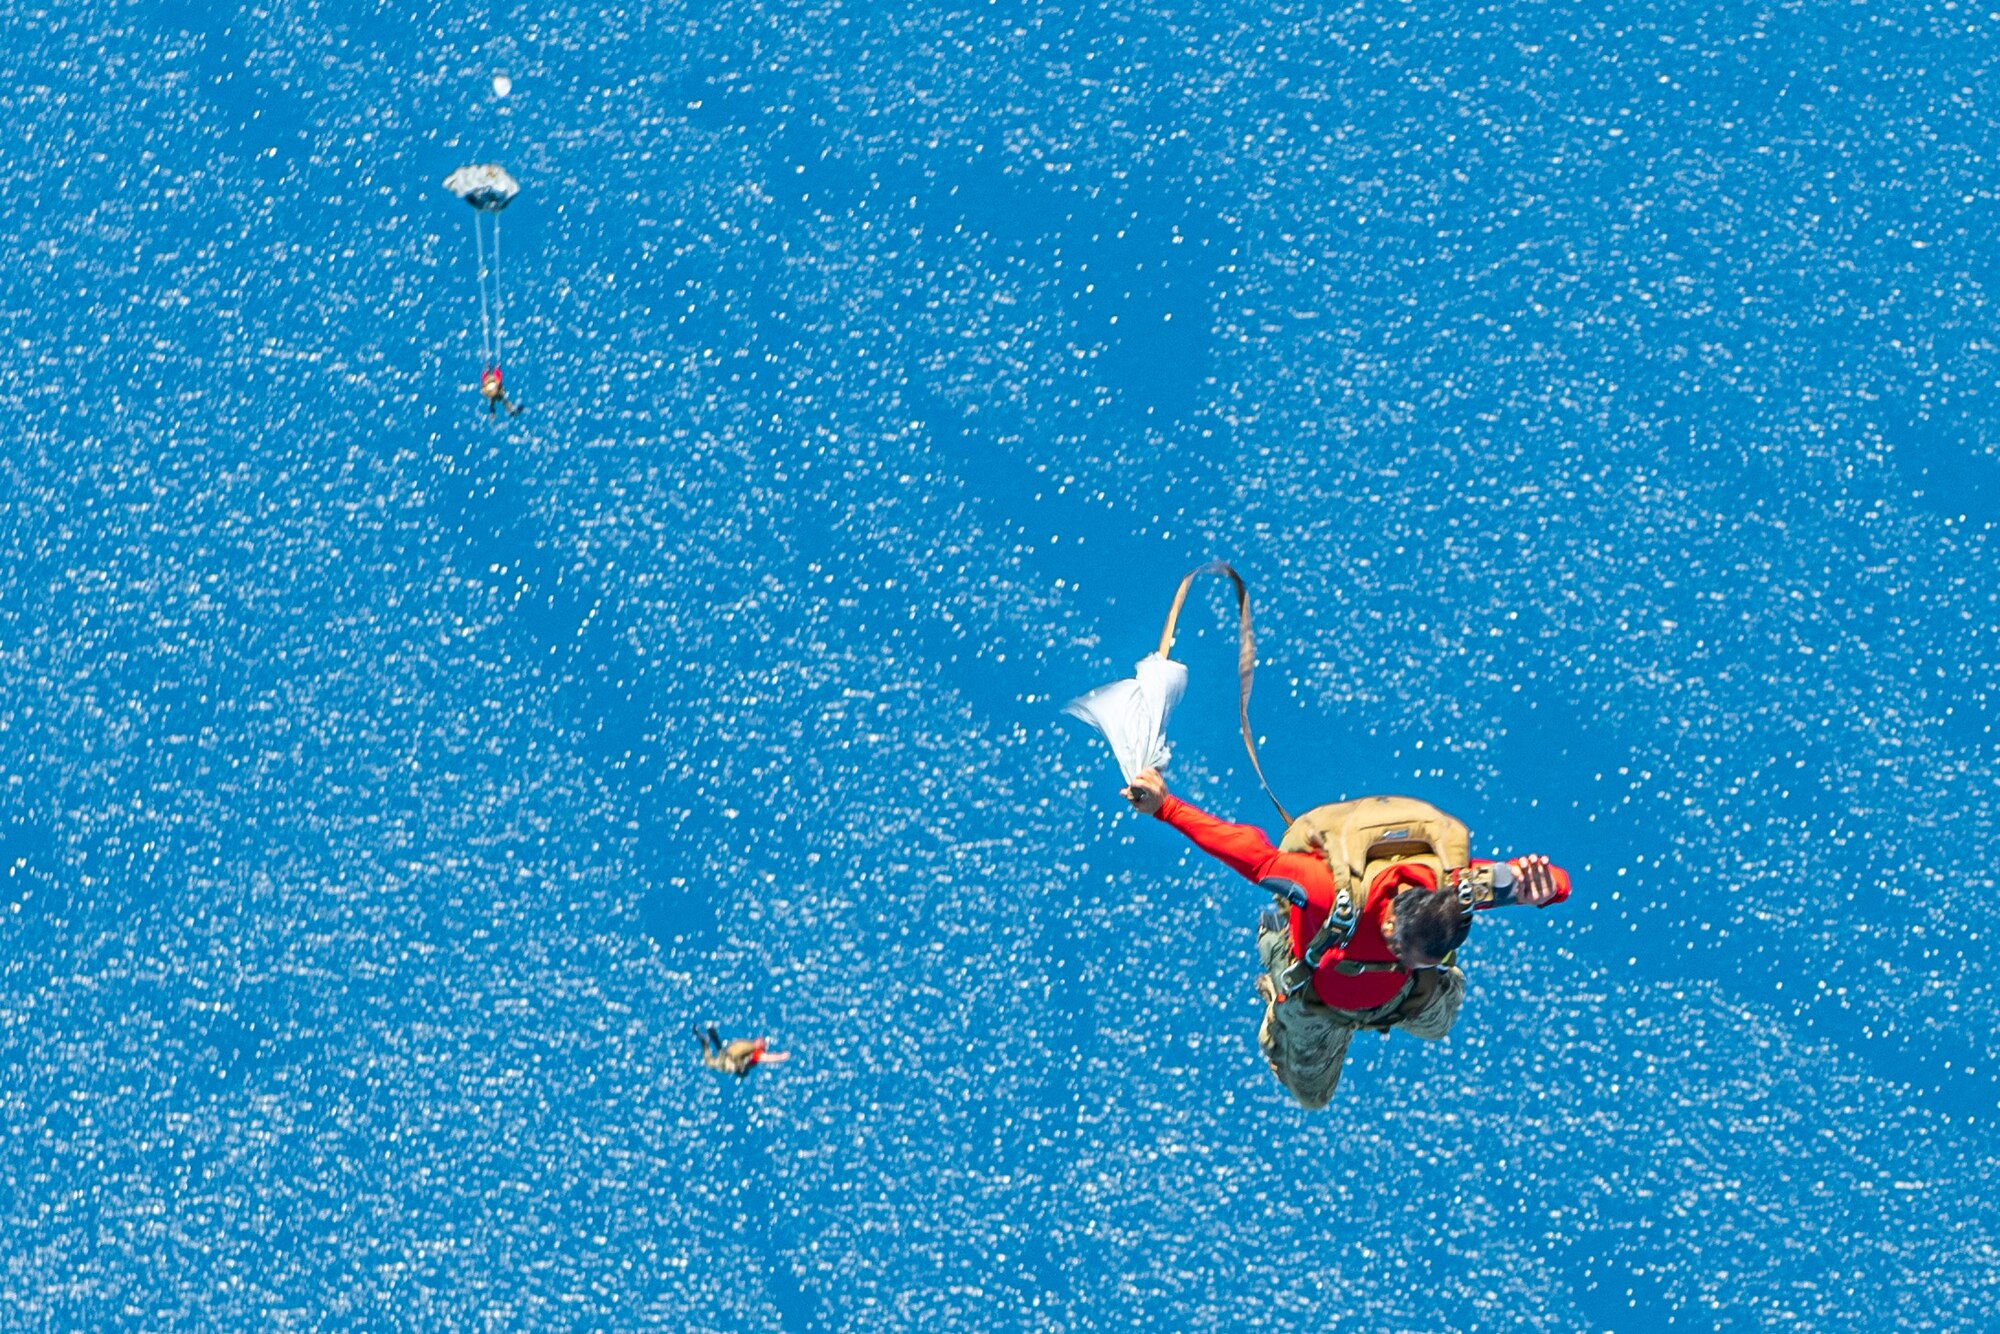 An Air Force member releases his parachute as he free falls towards the ocean